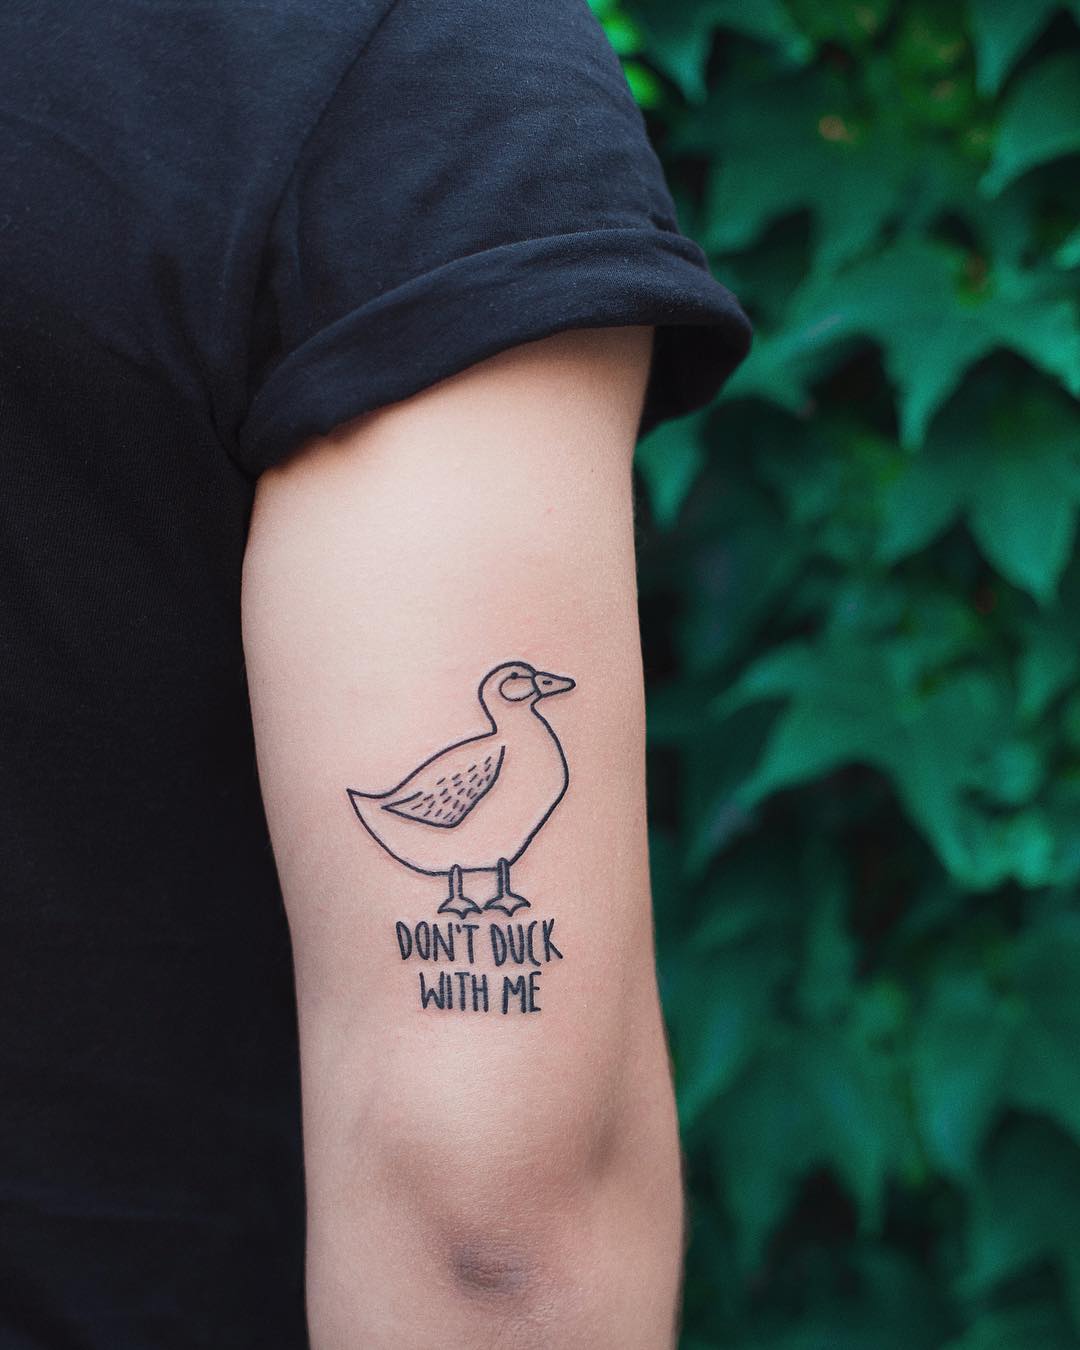 Don’t duck with me tattoo by Dżudi Bazgrole